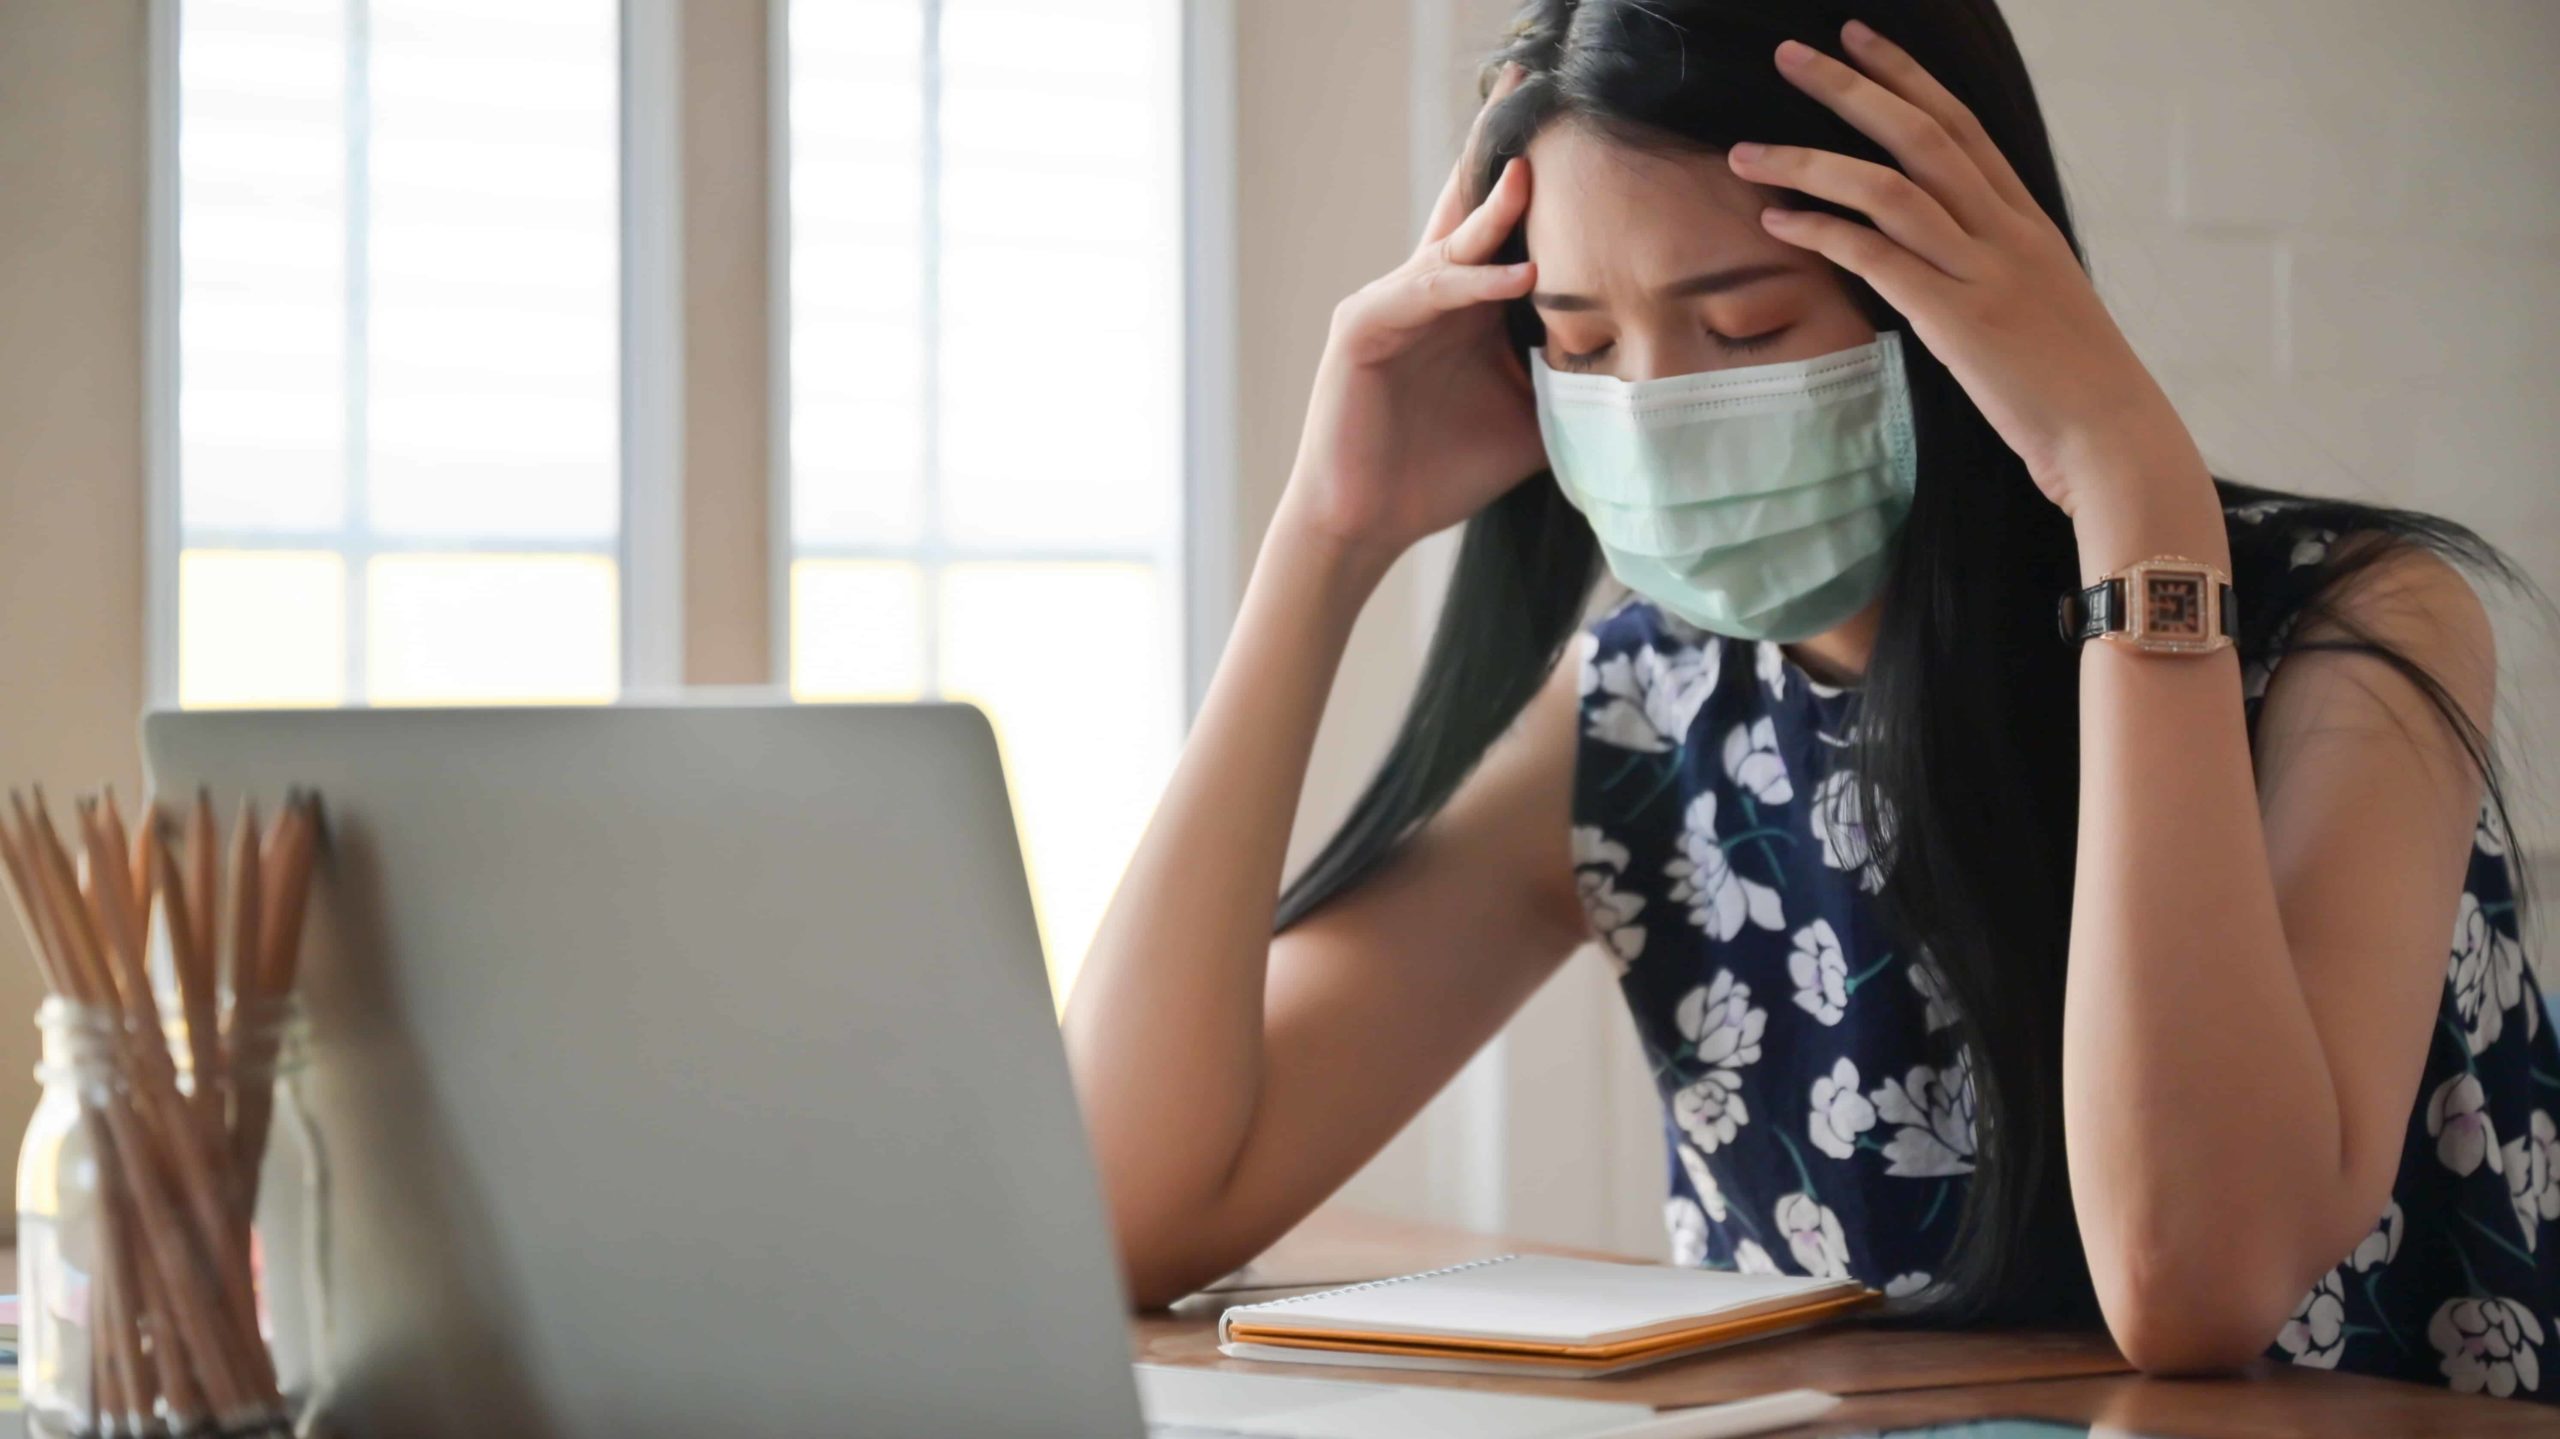 7 practical ideas to help your business during Corona pandemic